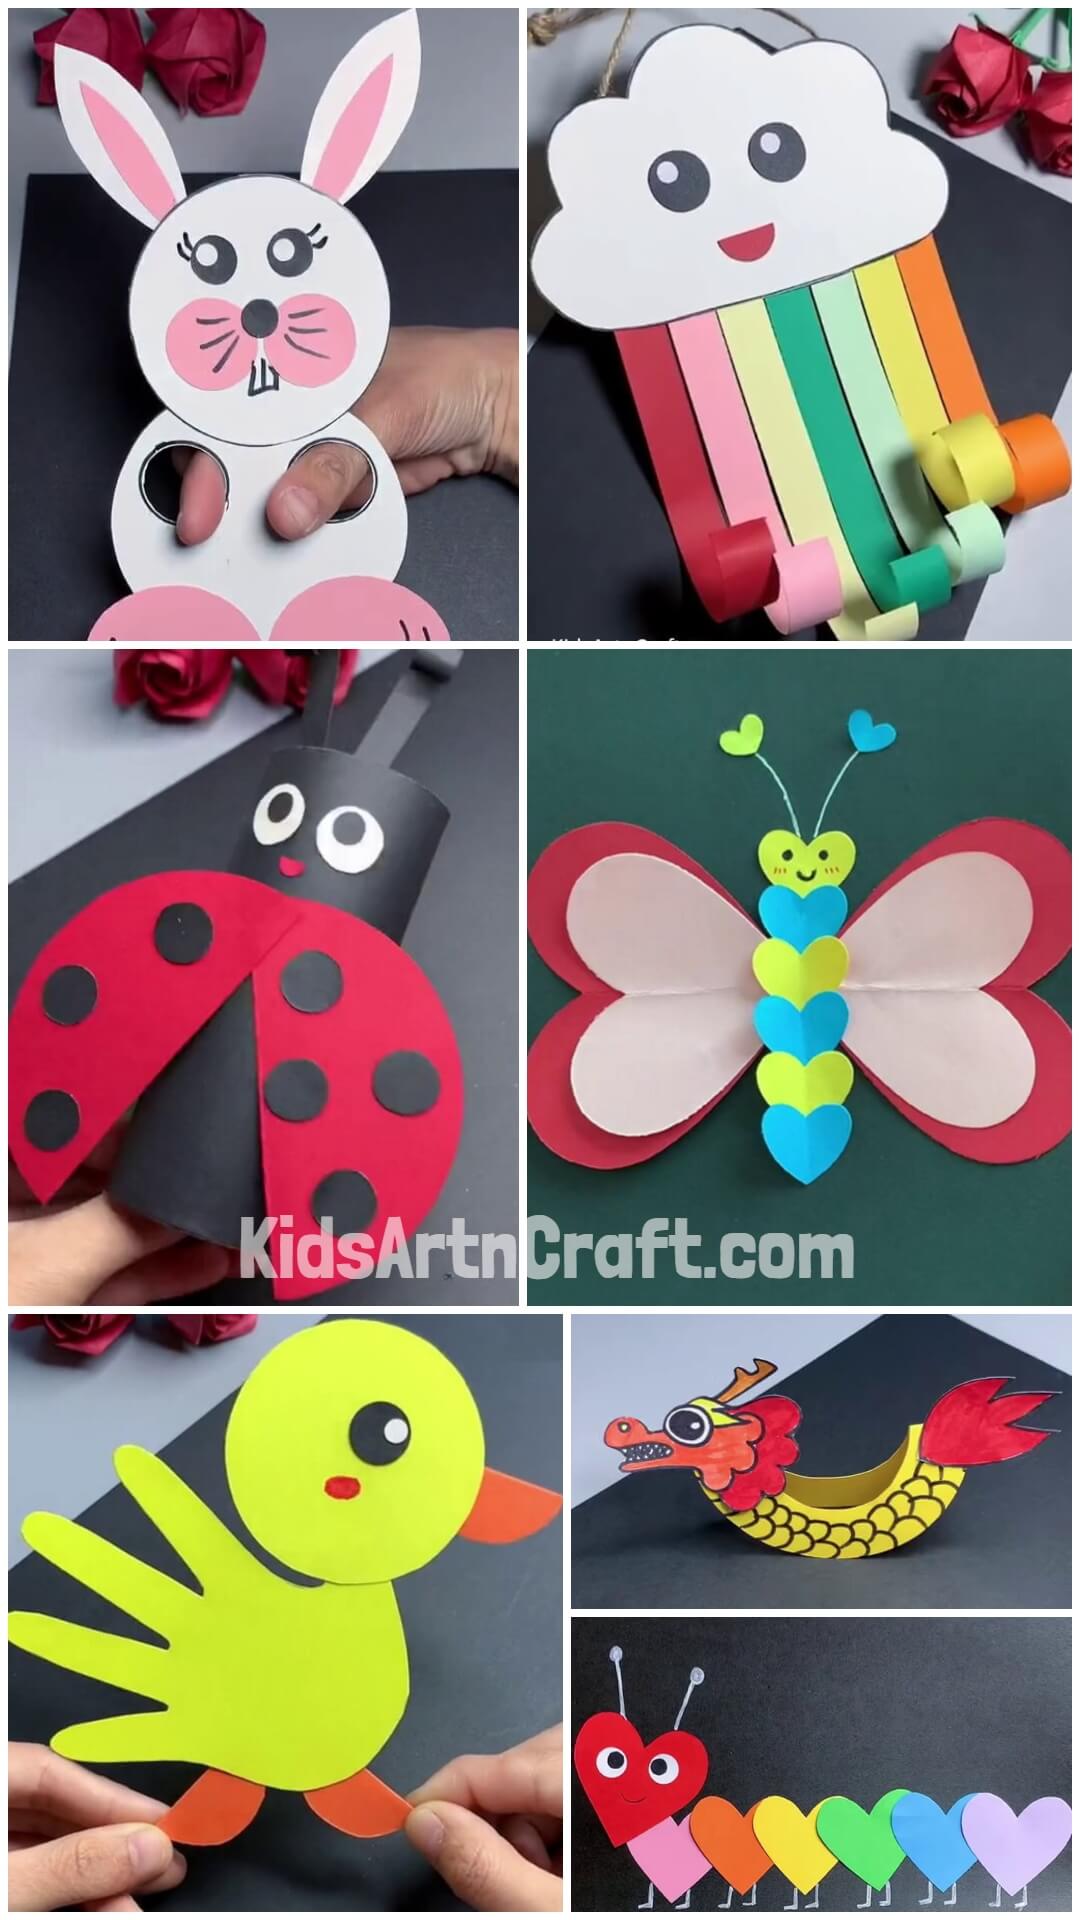 DIY Simple Paper Crafts to Make at Home